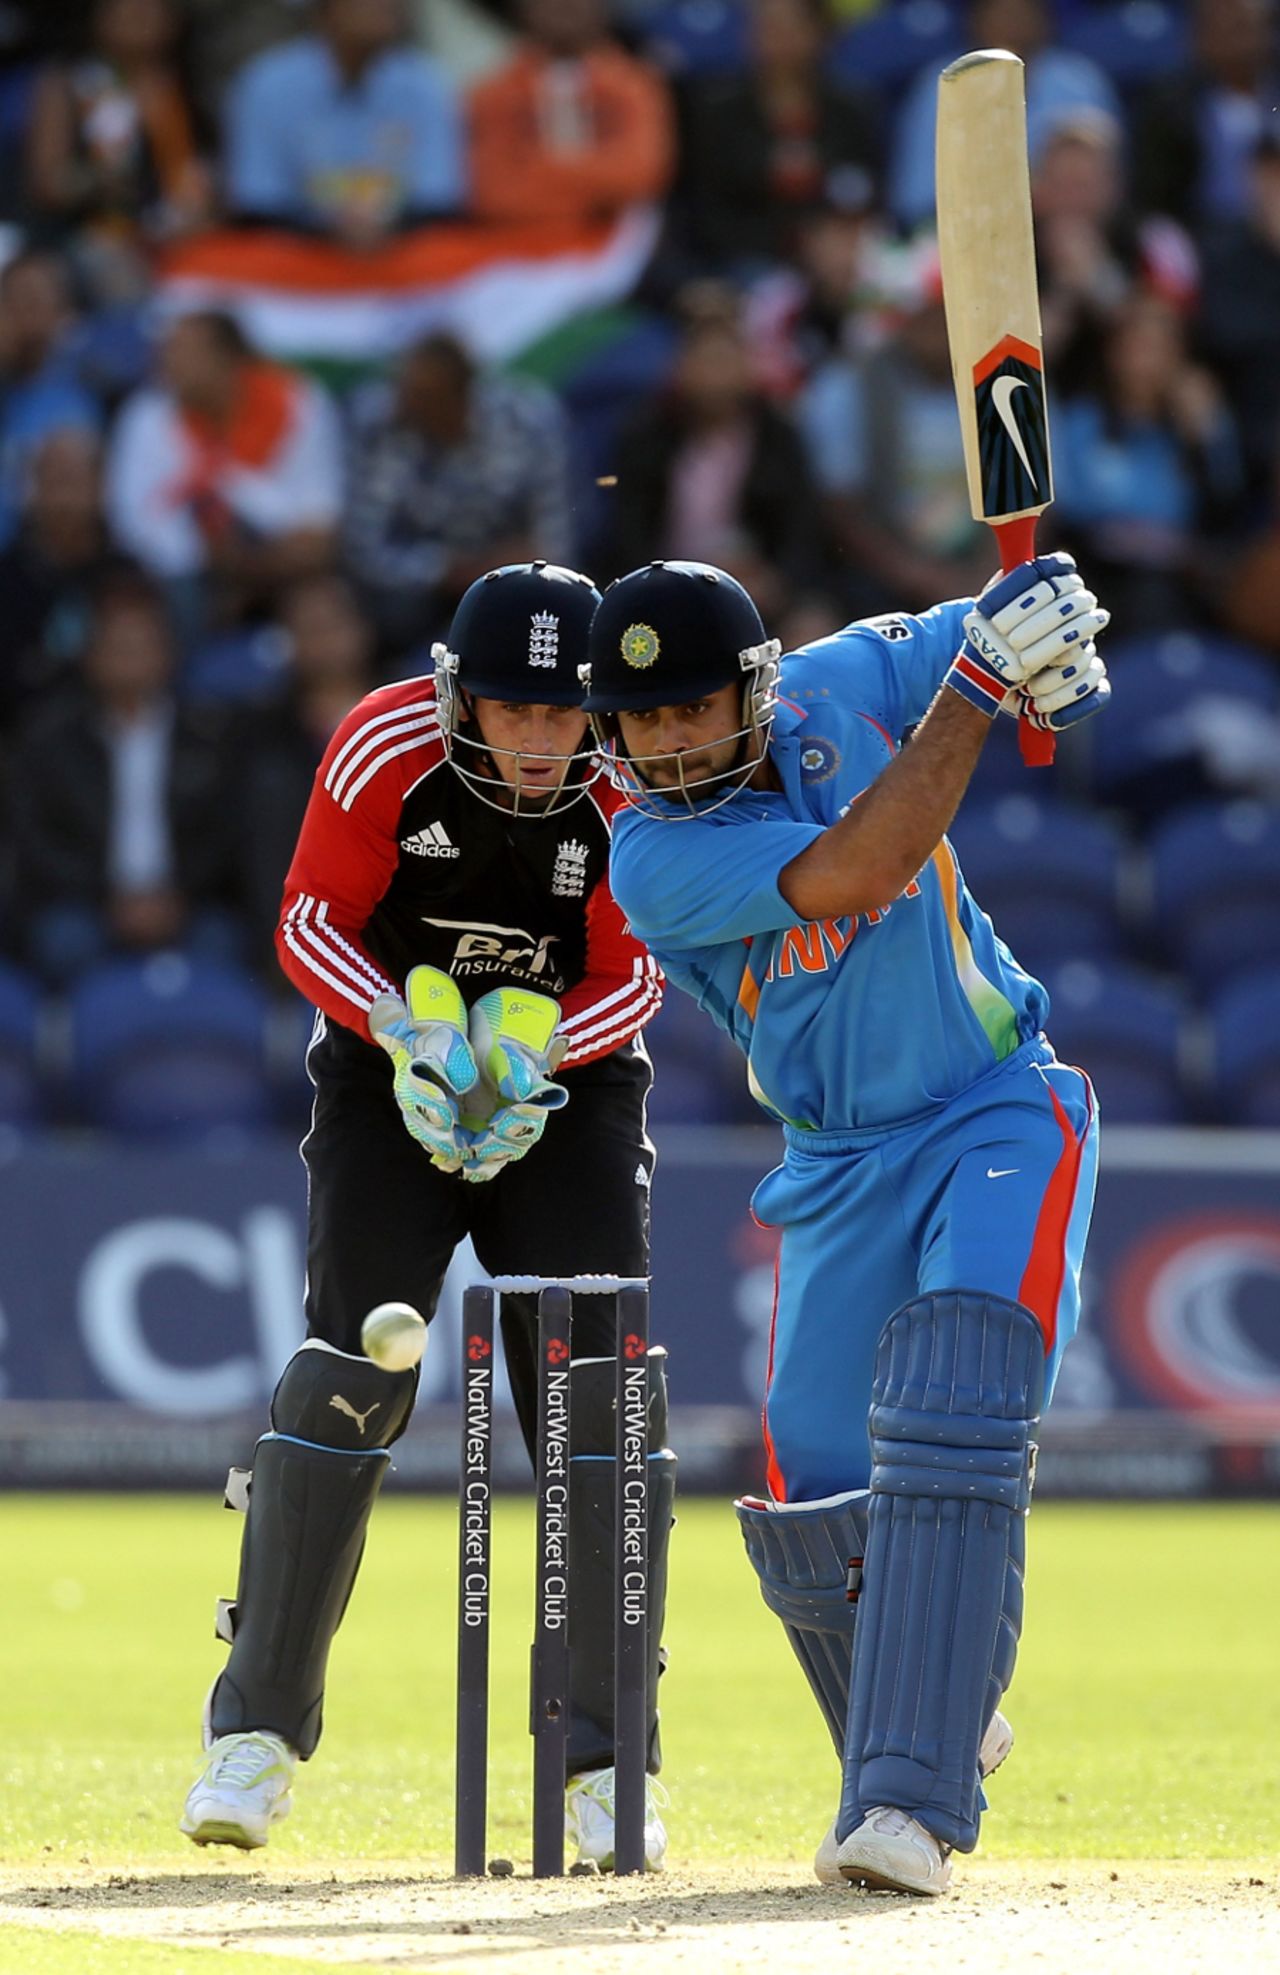 Virat Kohli drives into the off side during his knock against England, England v India, 5th ODI, Cardiff, September 16, 2011